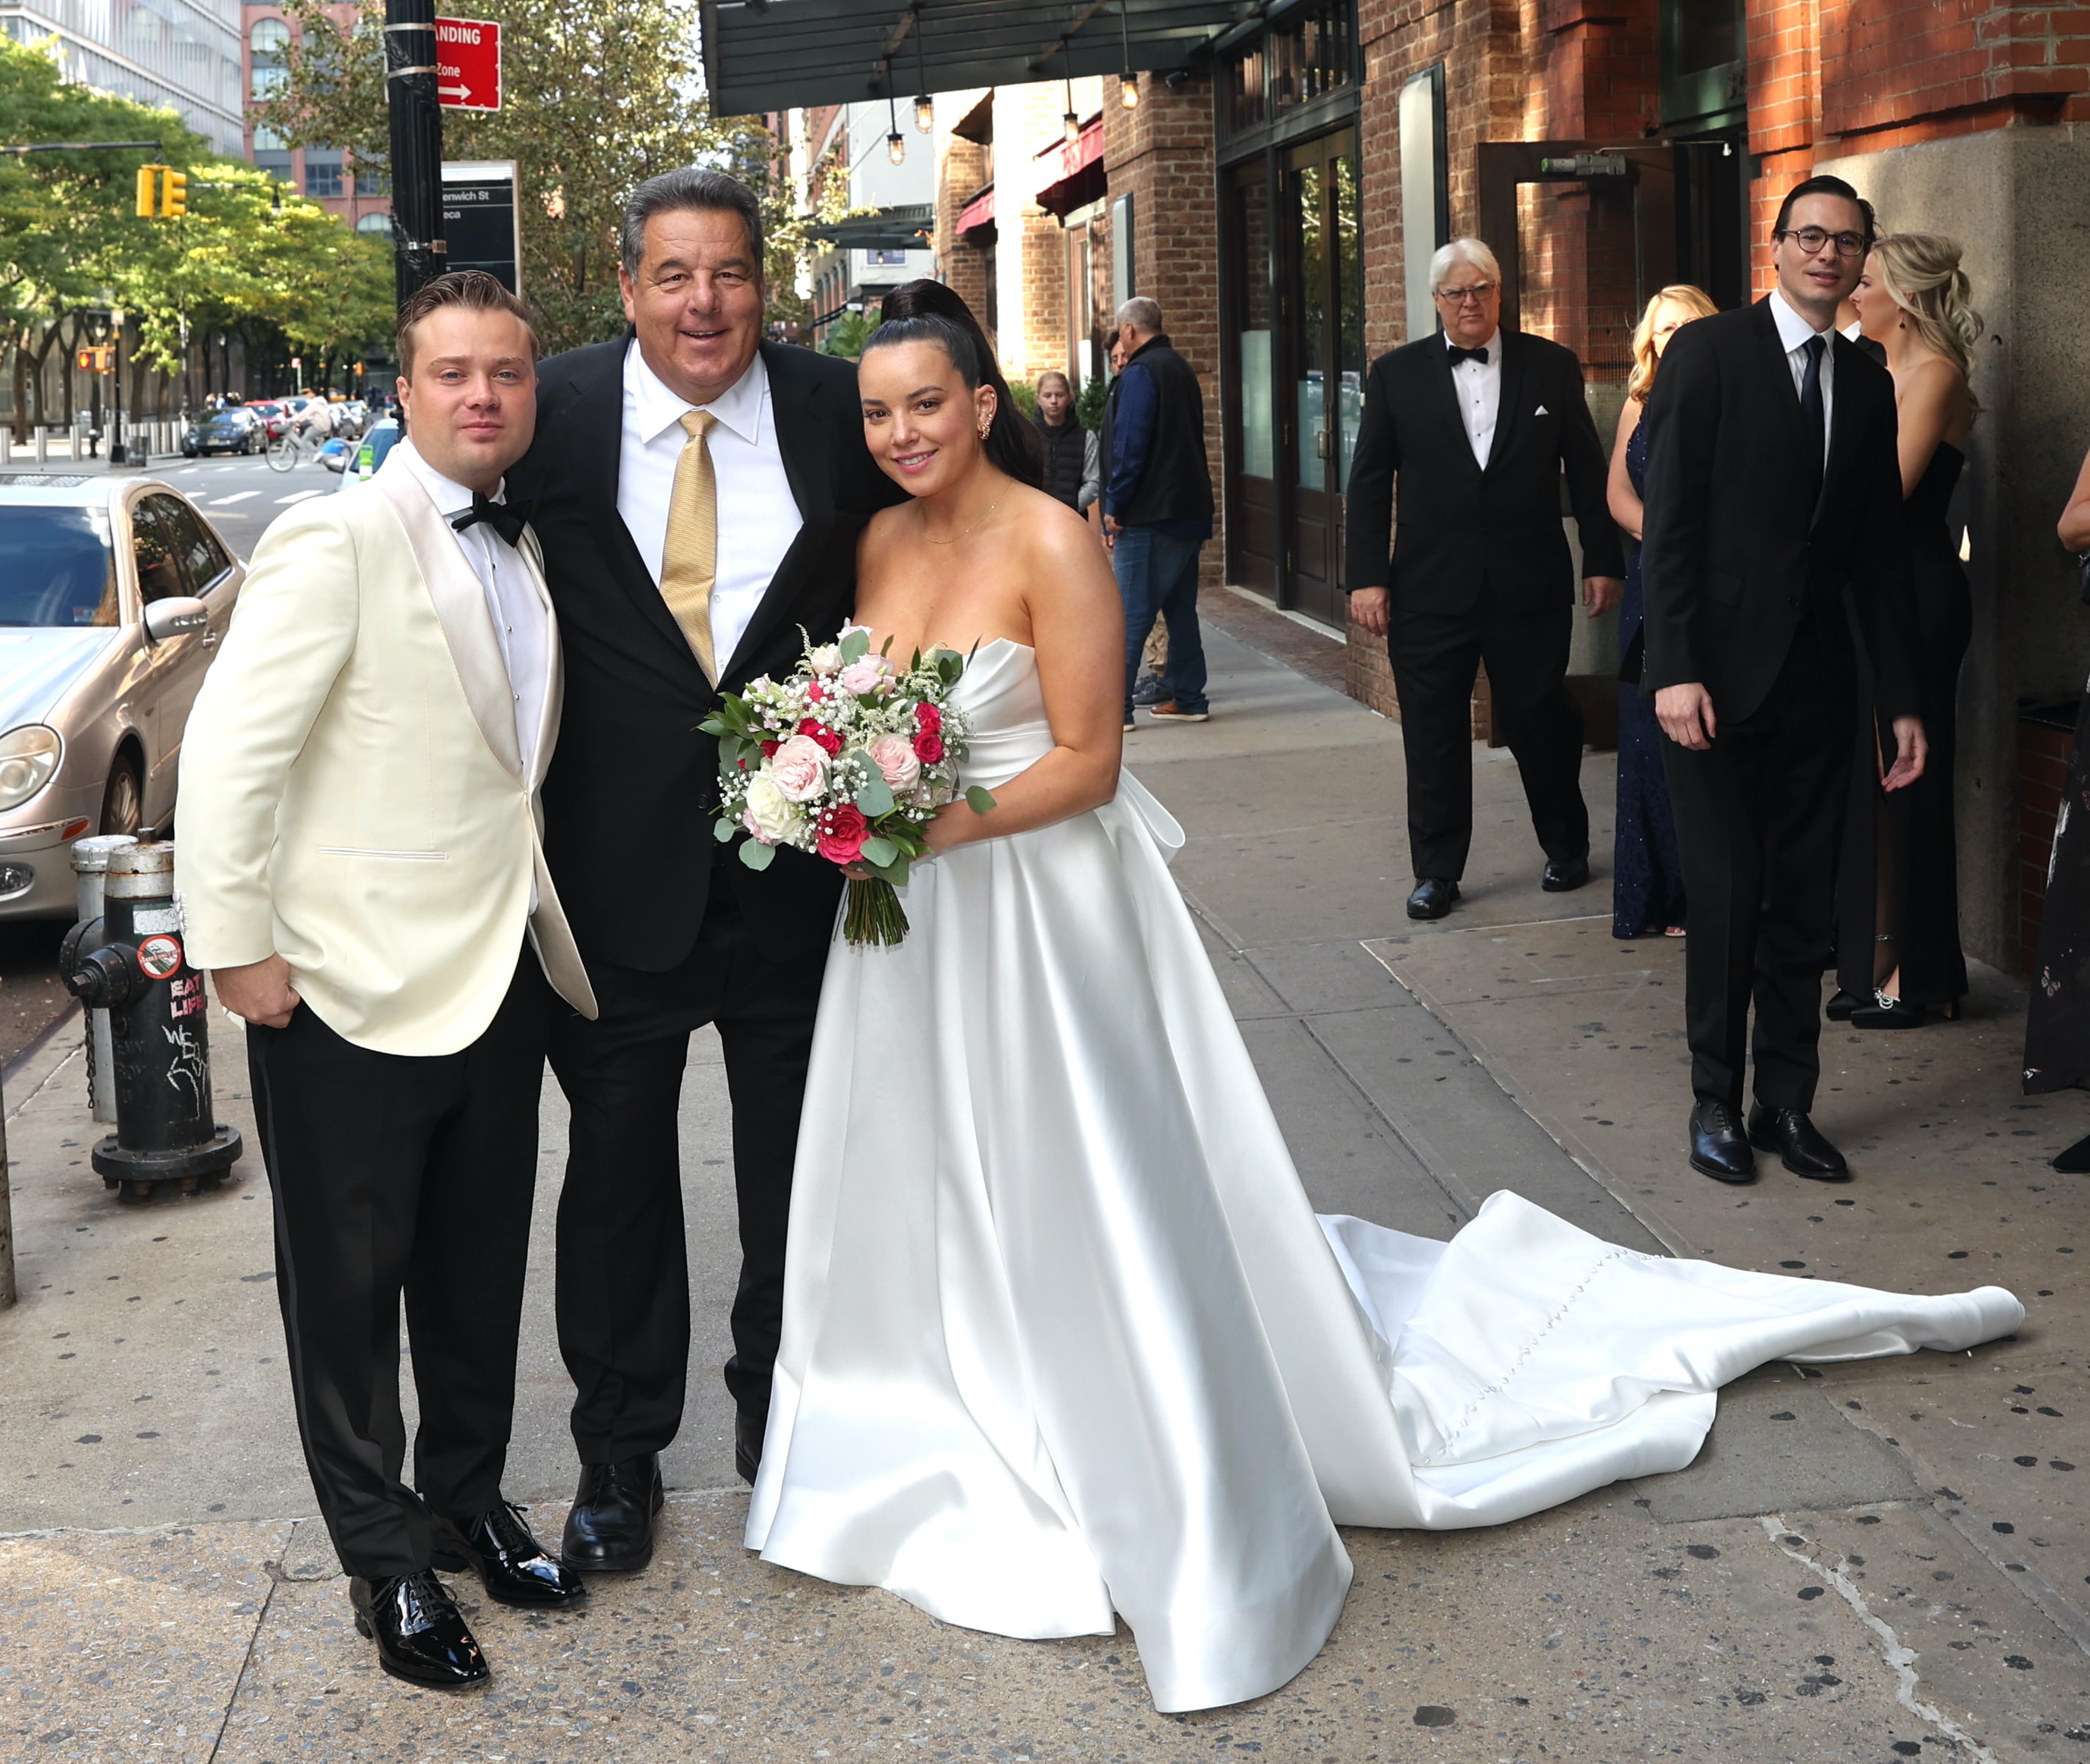 Zach Binder, Steve, and Ciara Schirripa on Ciara and Zach's wedding day in New York City on October 8, 2023 | Source: Getty Images